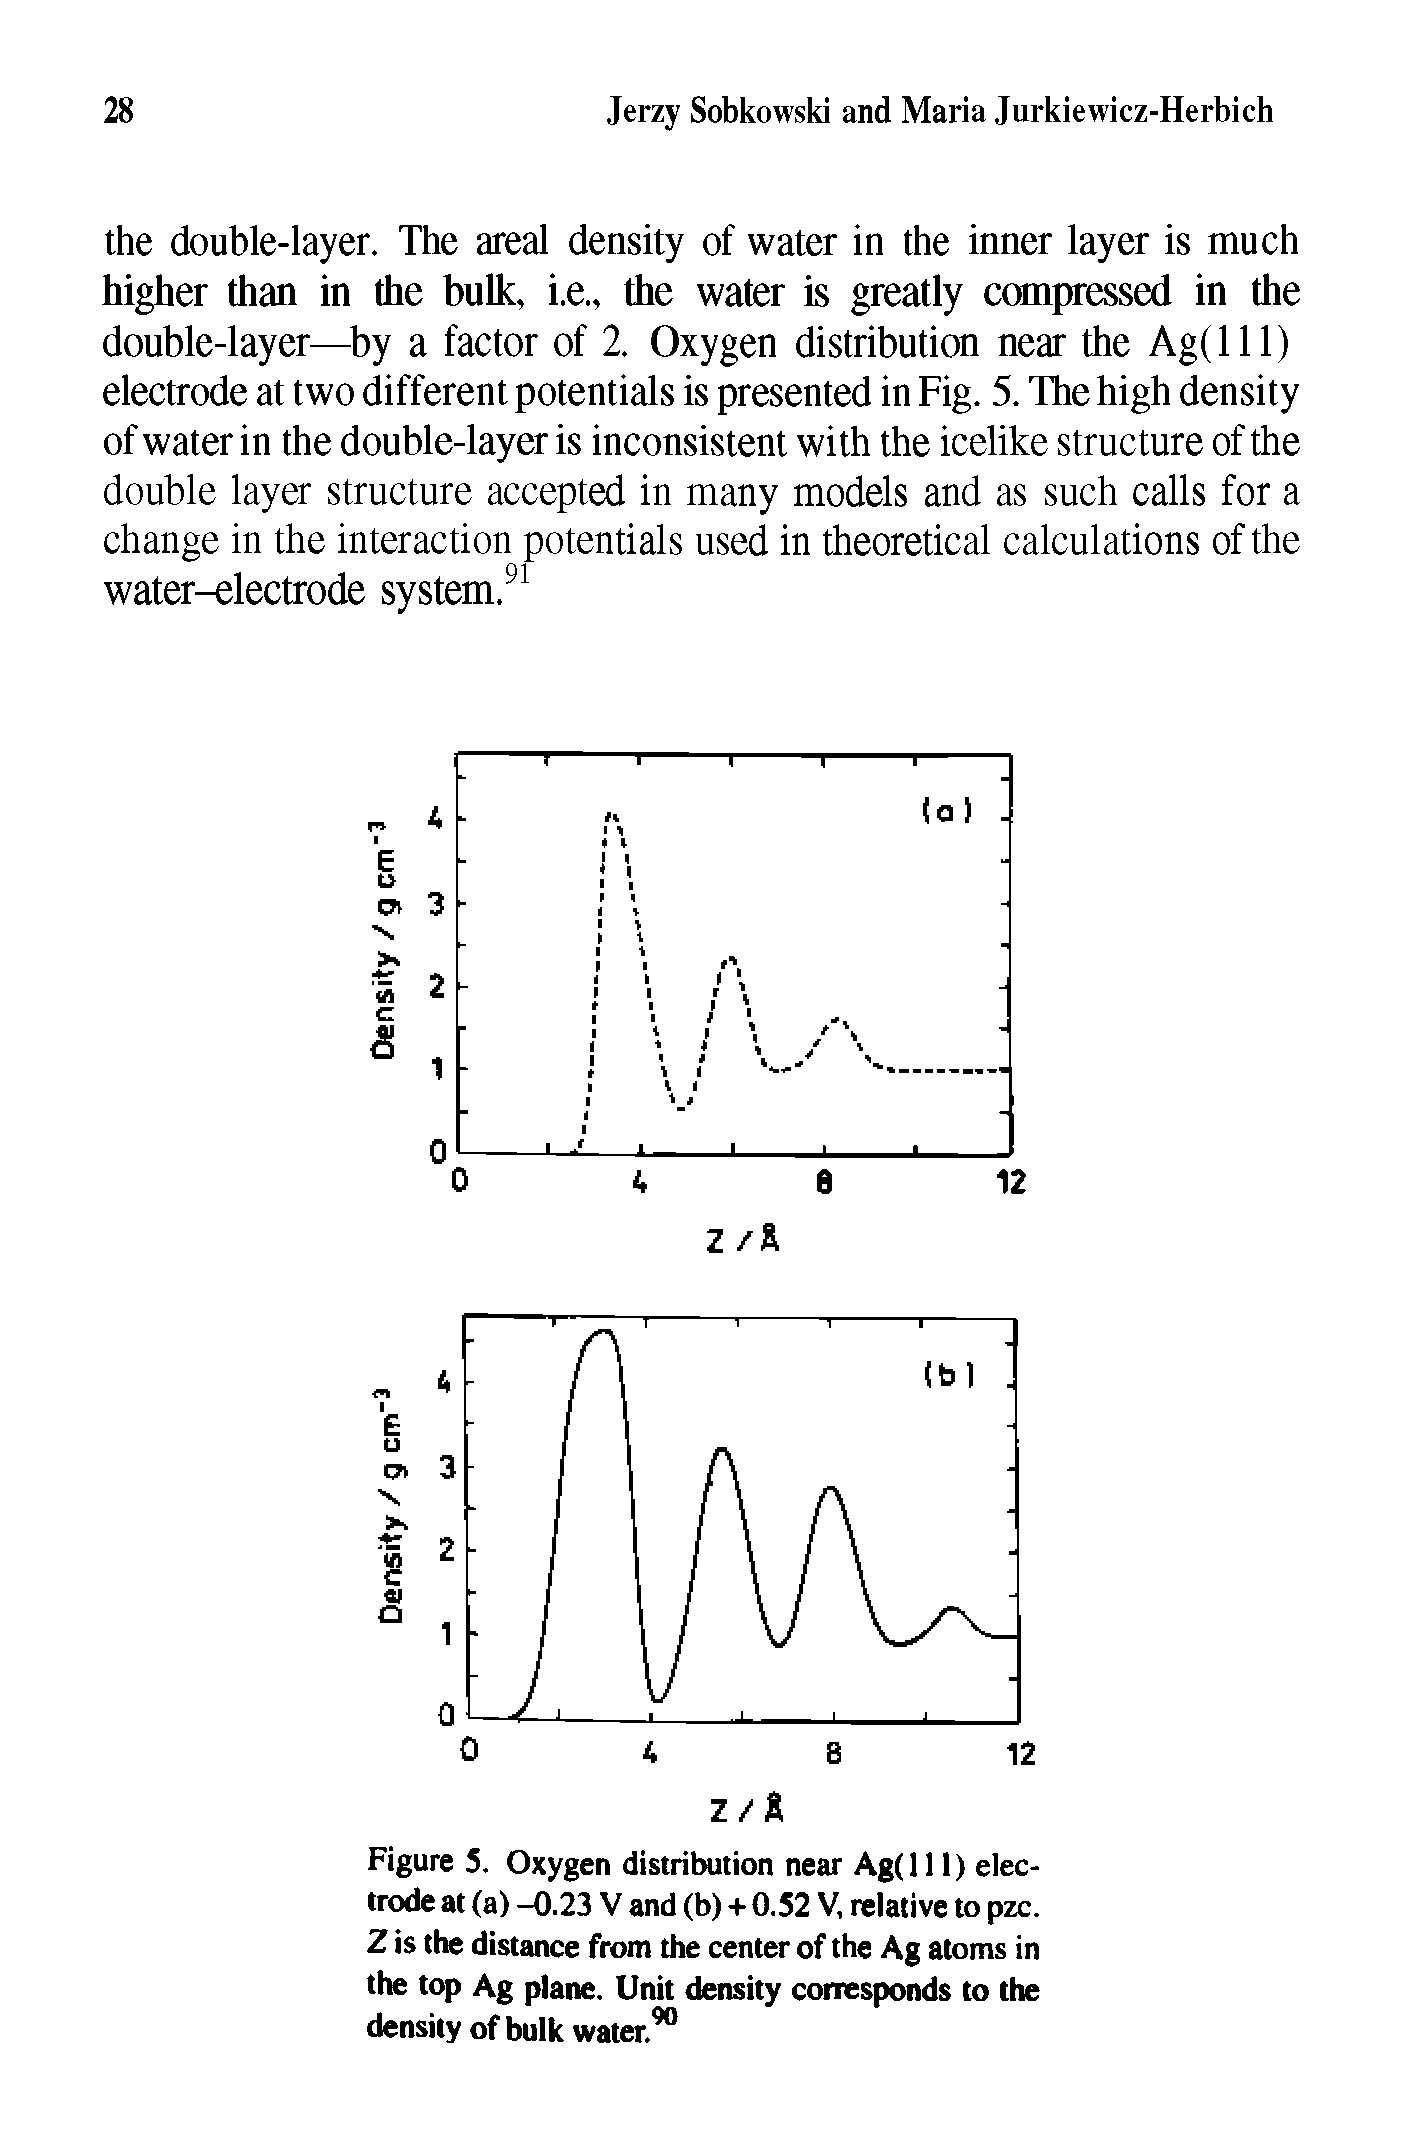 Figure 5. Oxygen distribution near Ag(l 11) electrode at (a) -0.23 V and (b)+0.52 V, relative to pzc. Z is the distance from the center of the Ag atoms in the top Ag plane. Unit density corresponds to the density of bulk water. ...